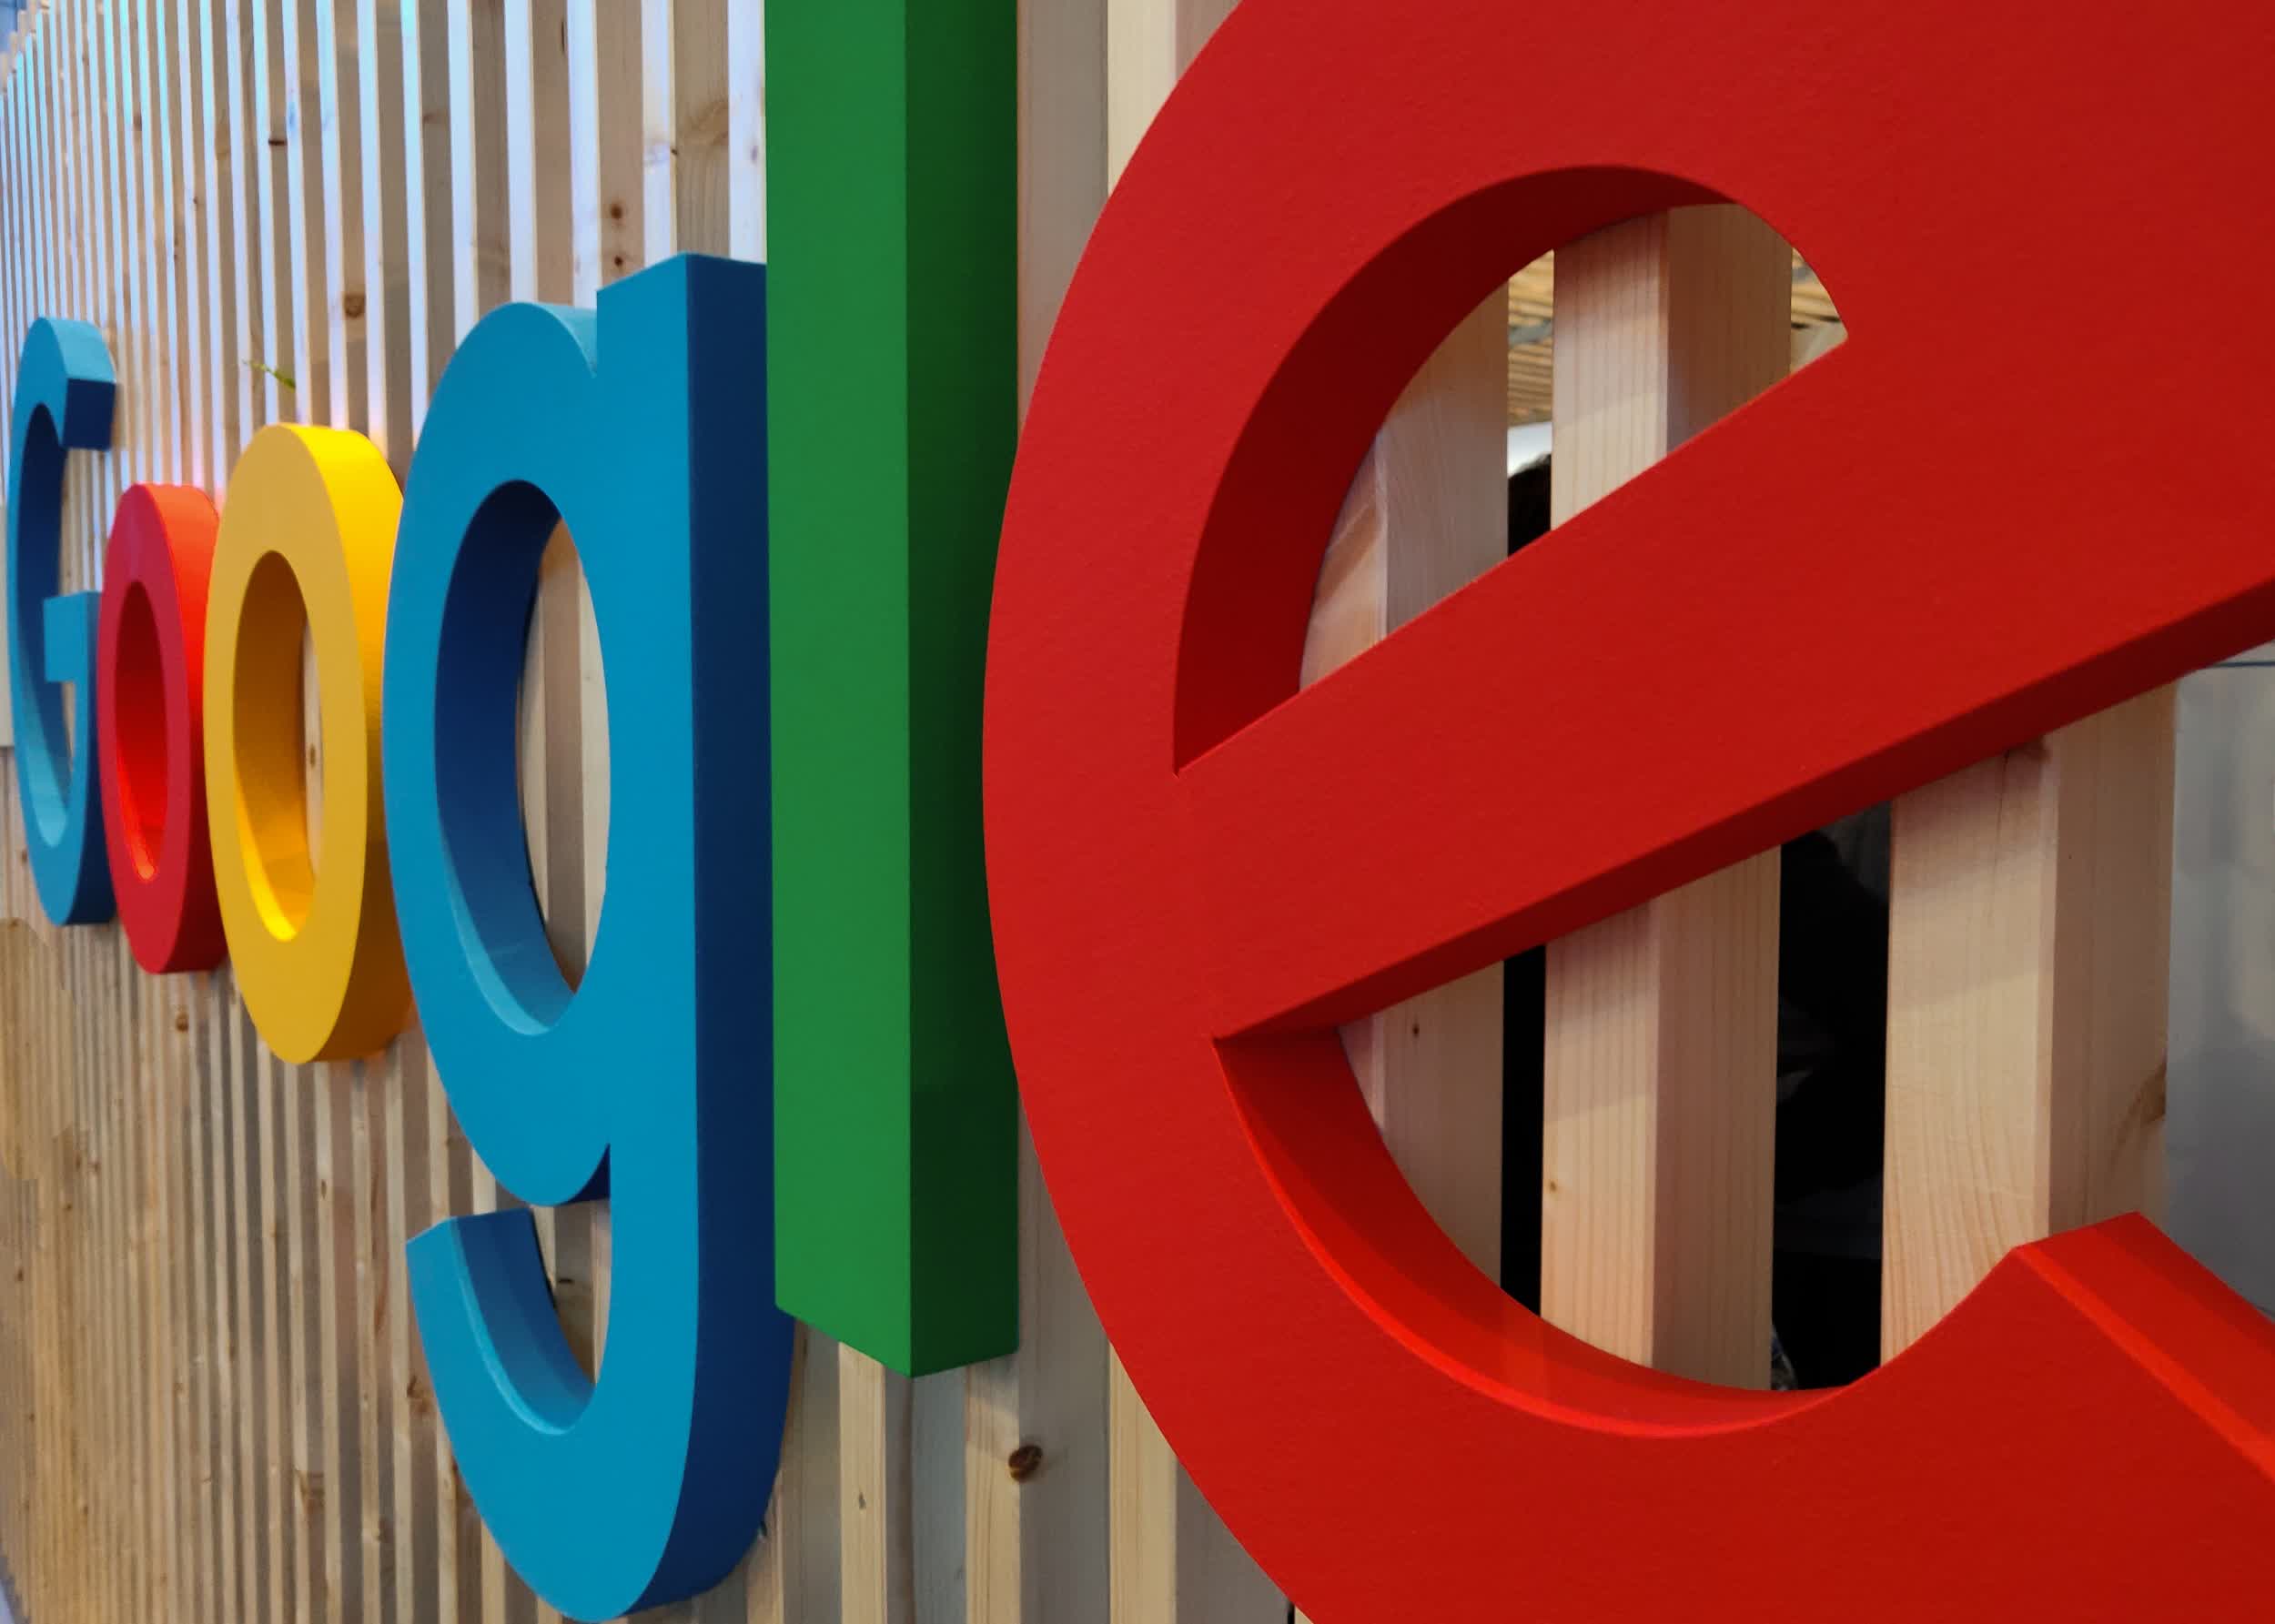 Alphabet announces 20-for-1 stock split to boost investor accessibility